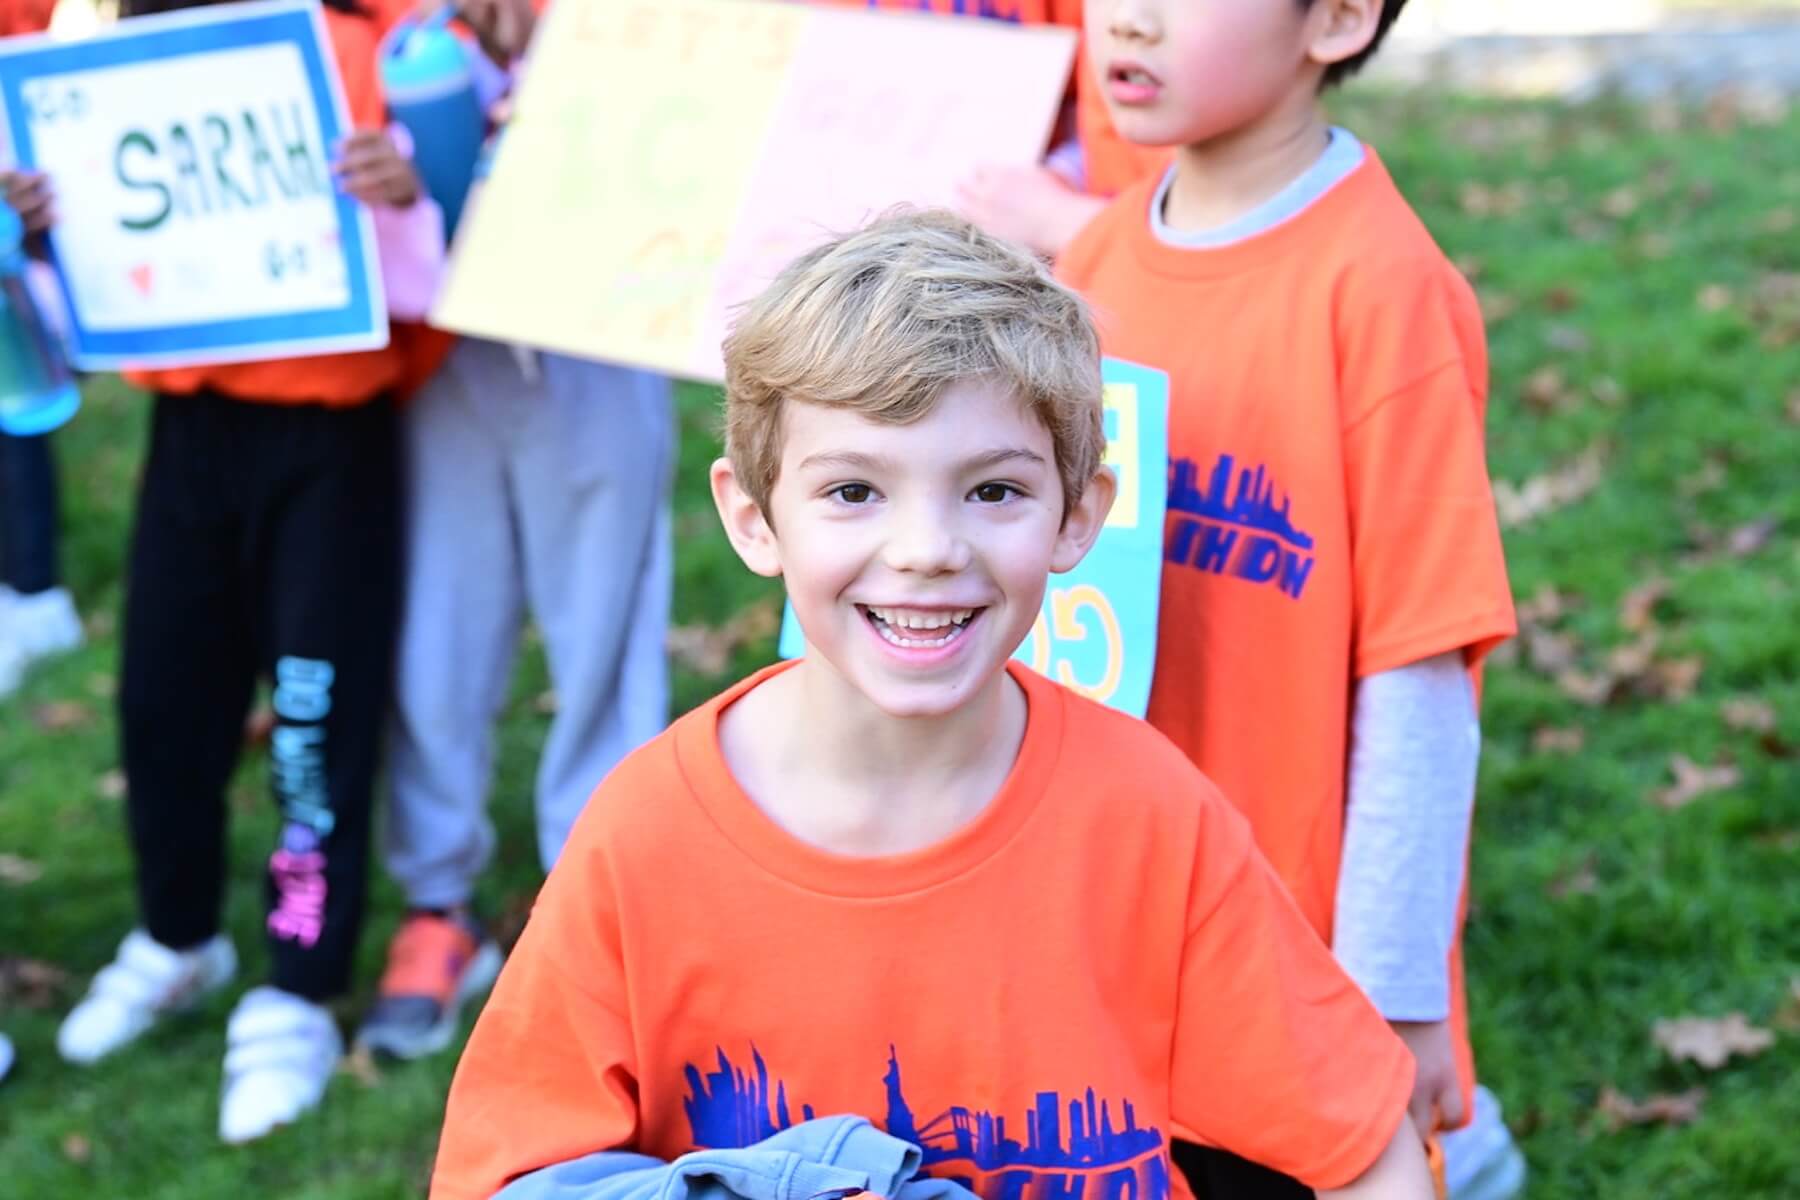 A student smiles at the camera after his race. He is holding a sweatshirt in his hand.